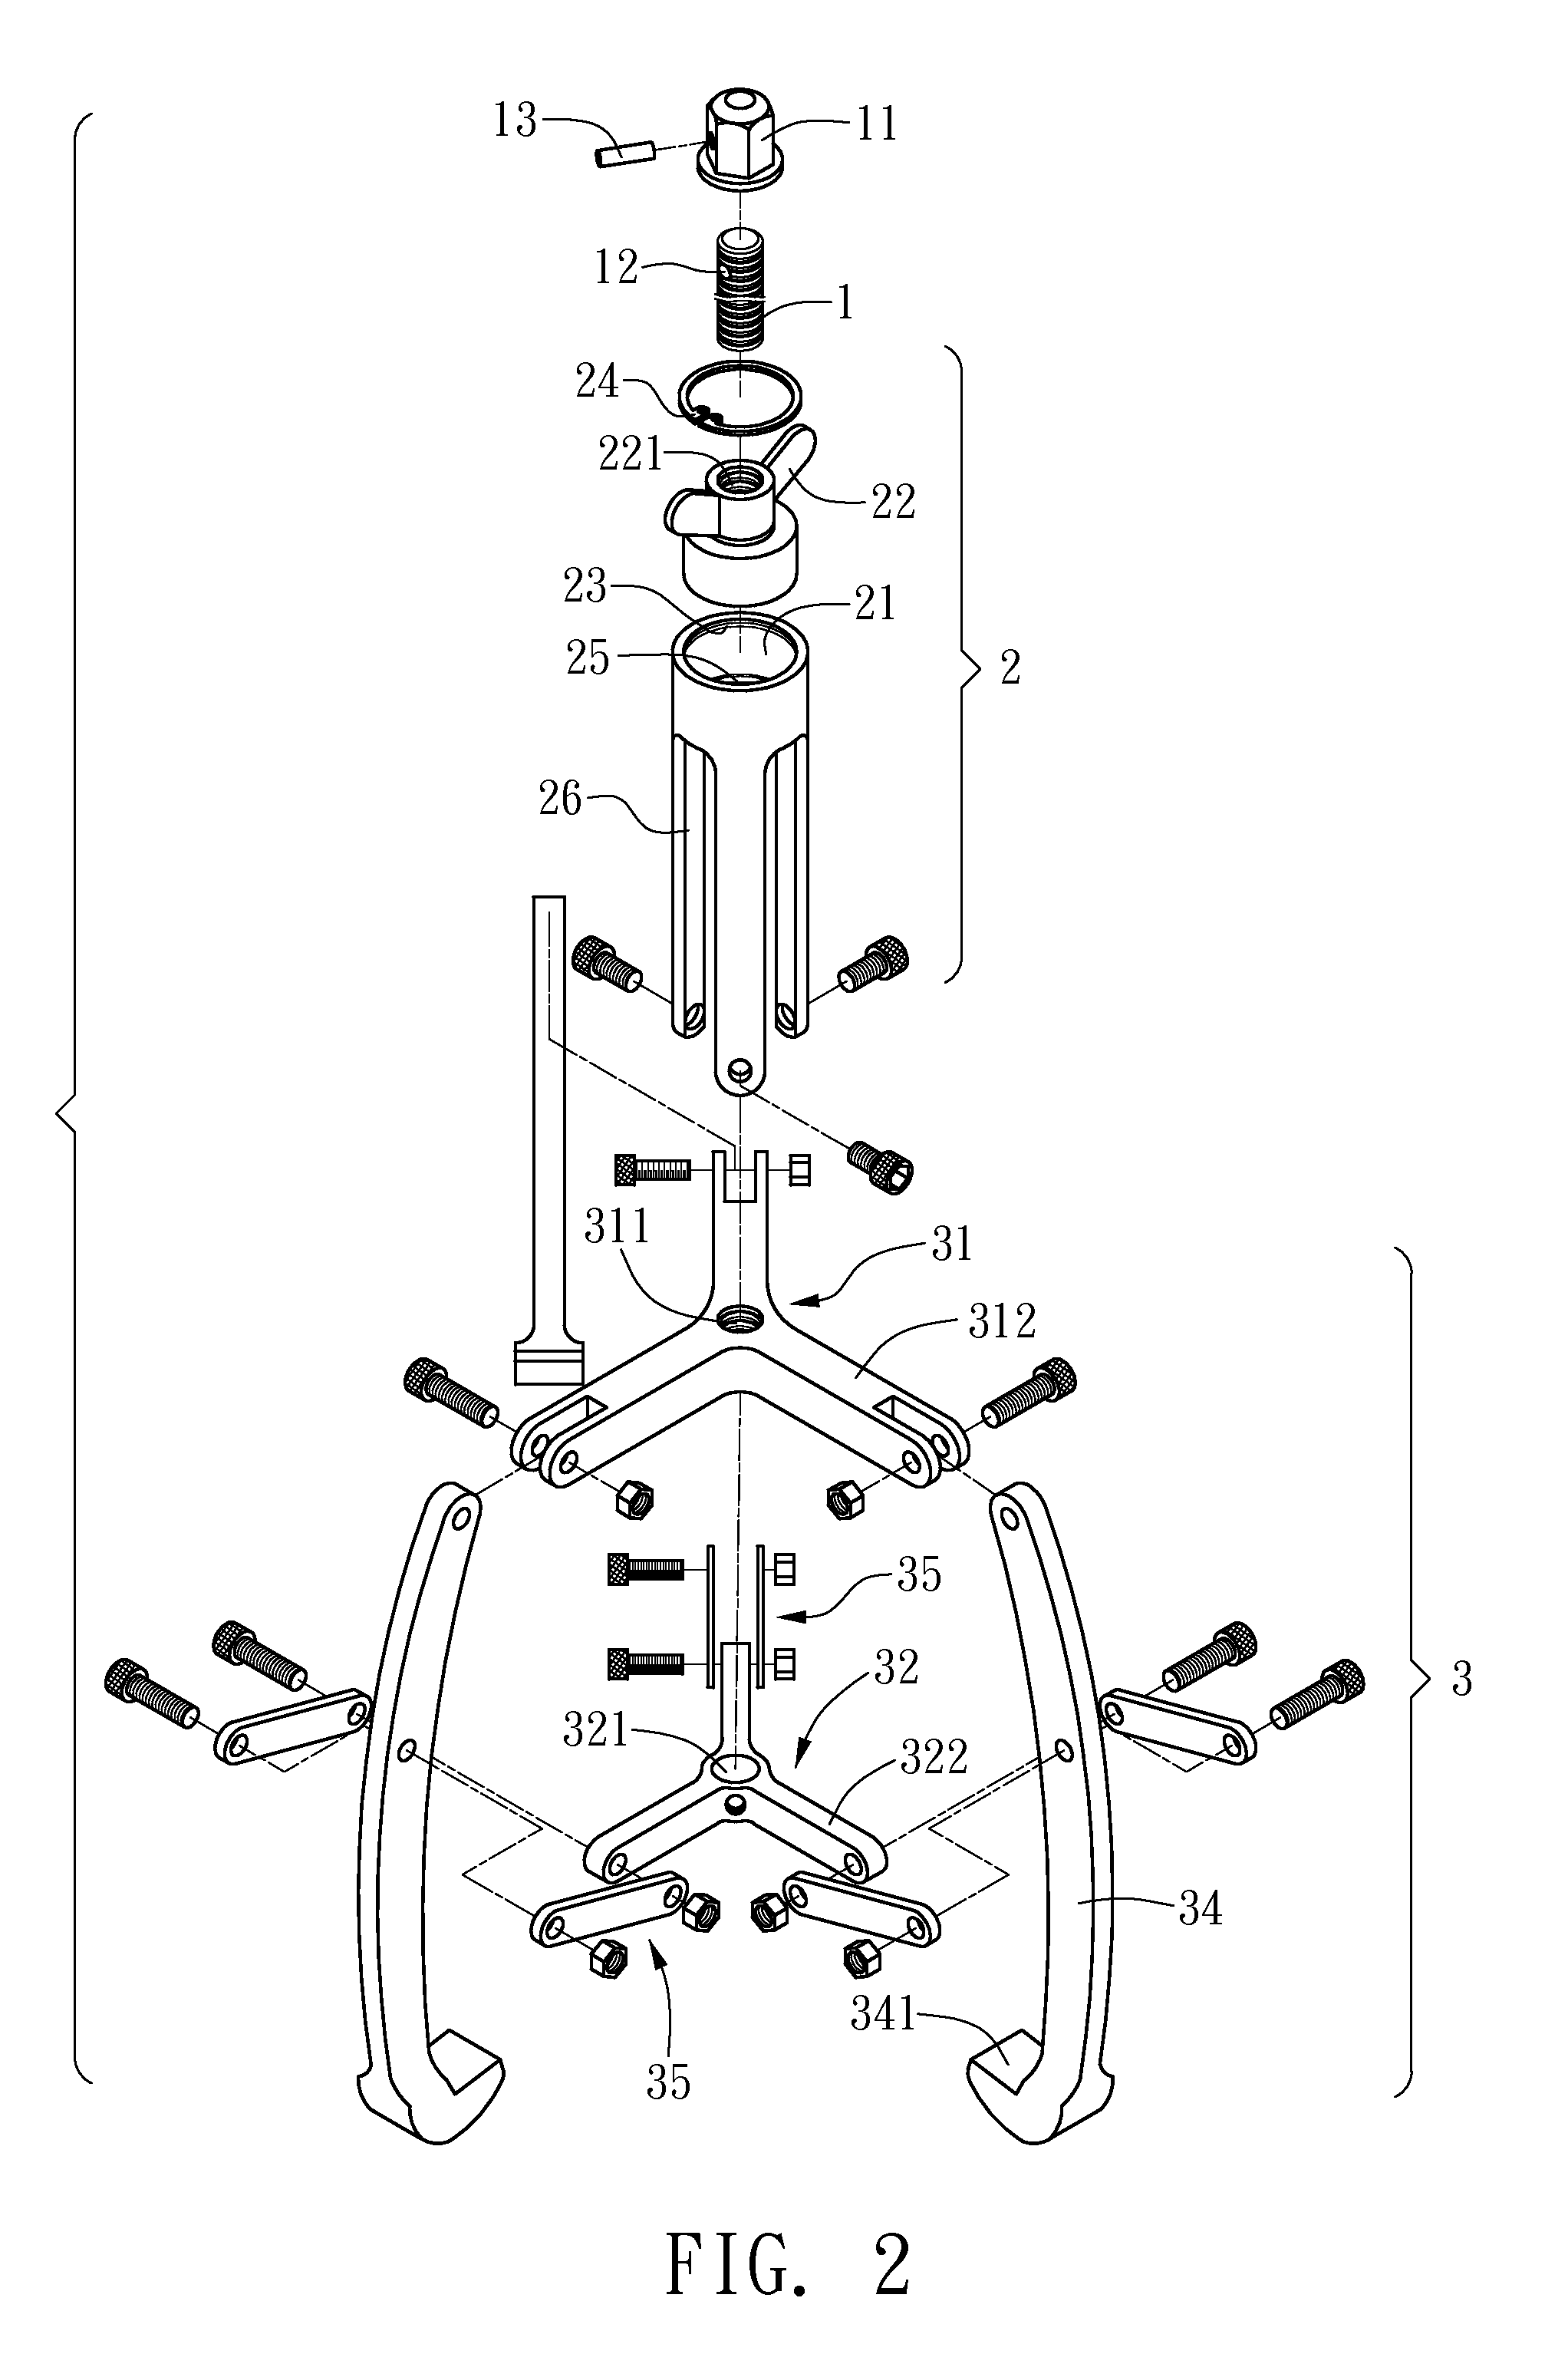 Structure of the Driving Axis of a Puller